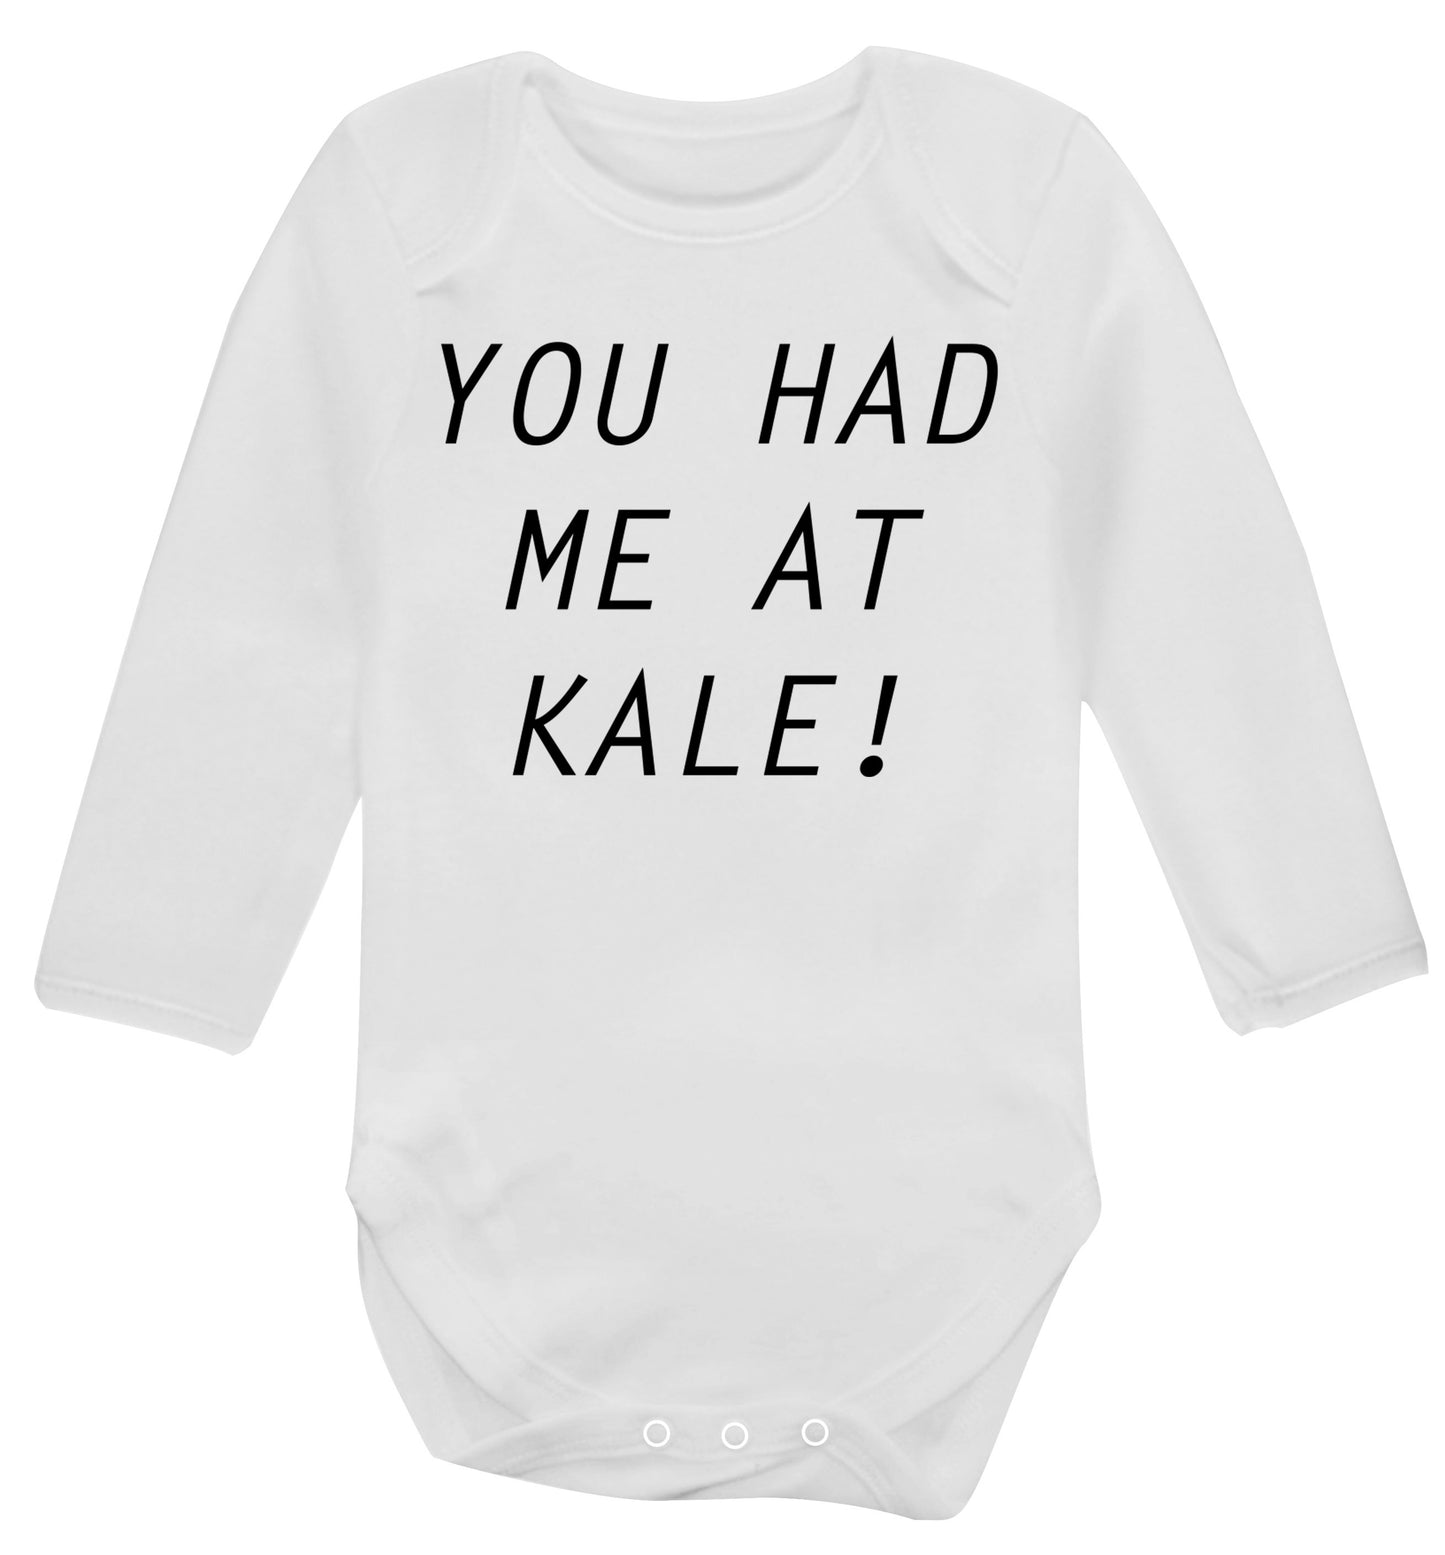 You had me at kale Baby Vest long sleeved white 6-12 months